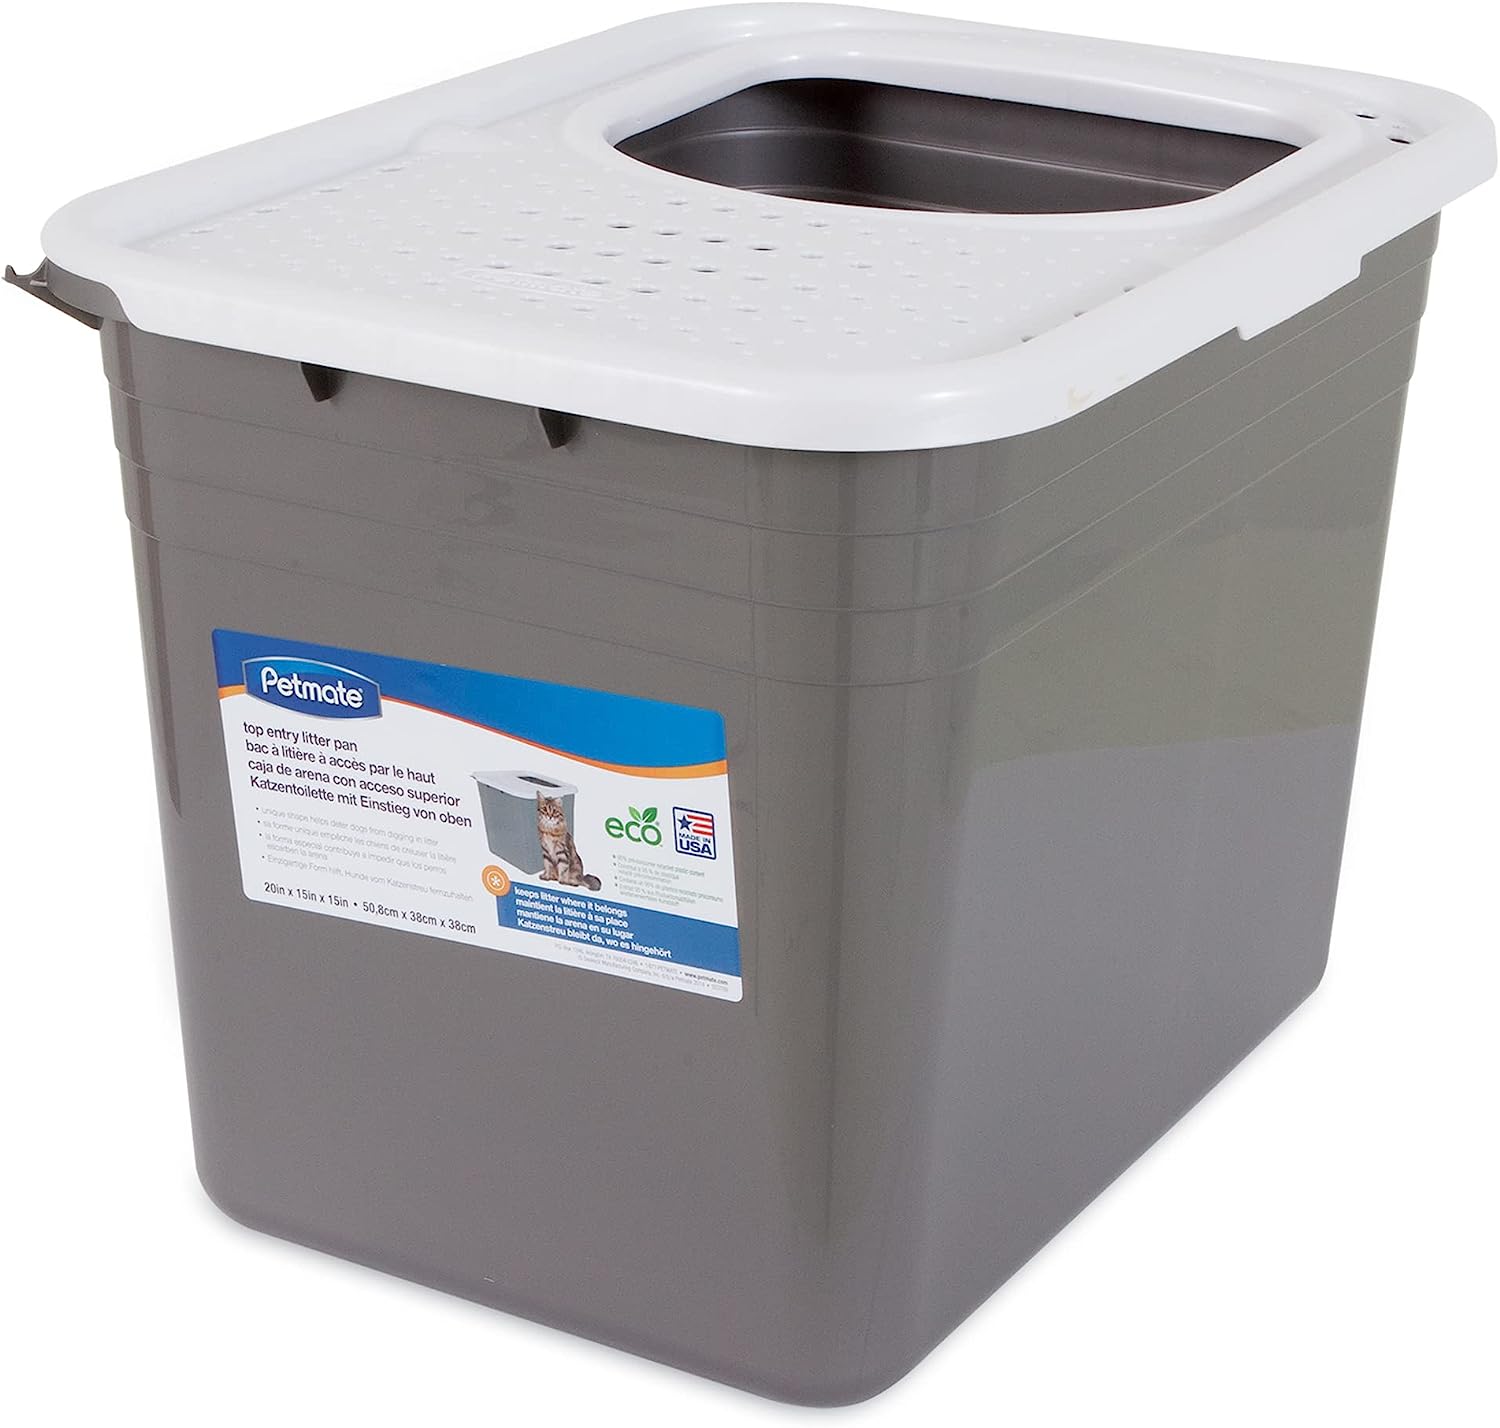 Petmate Top Entry Litter Cat Litter Box With Filter [...]